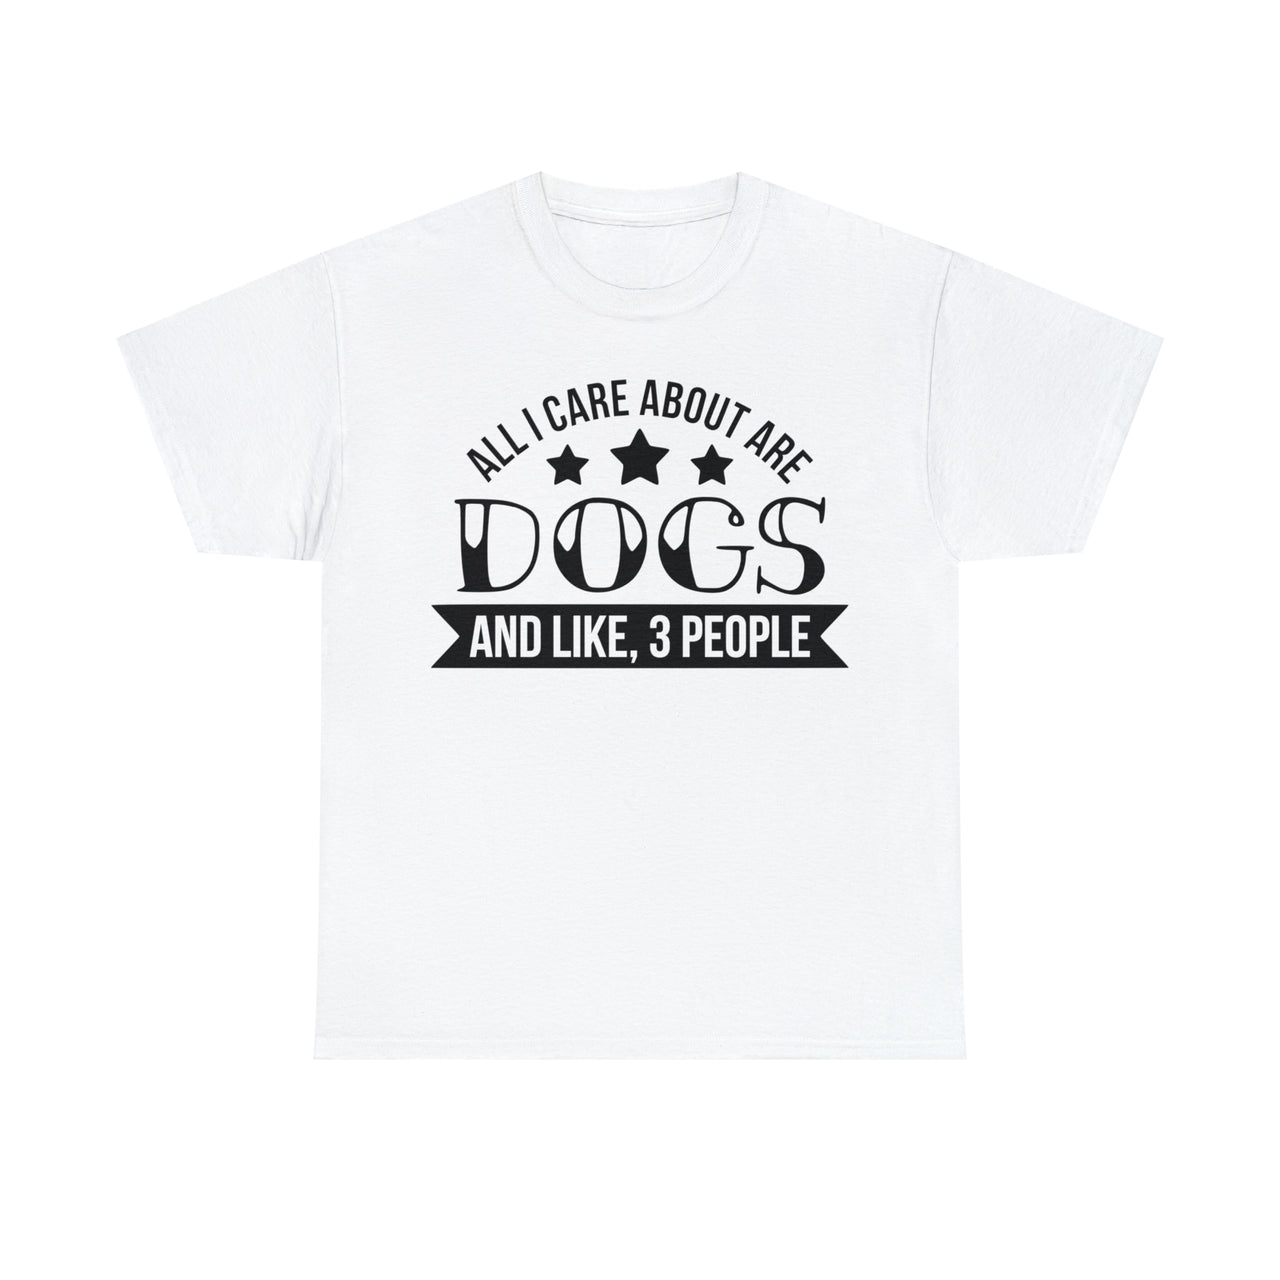 All I Care About Are Dogs and Like 3 People - Unisex T-Shirt